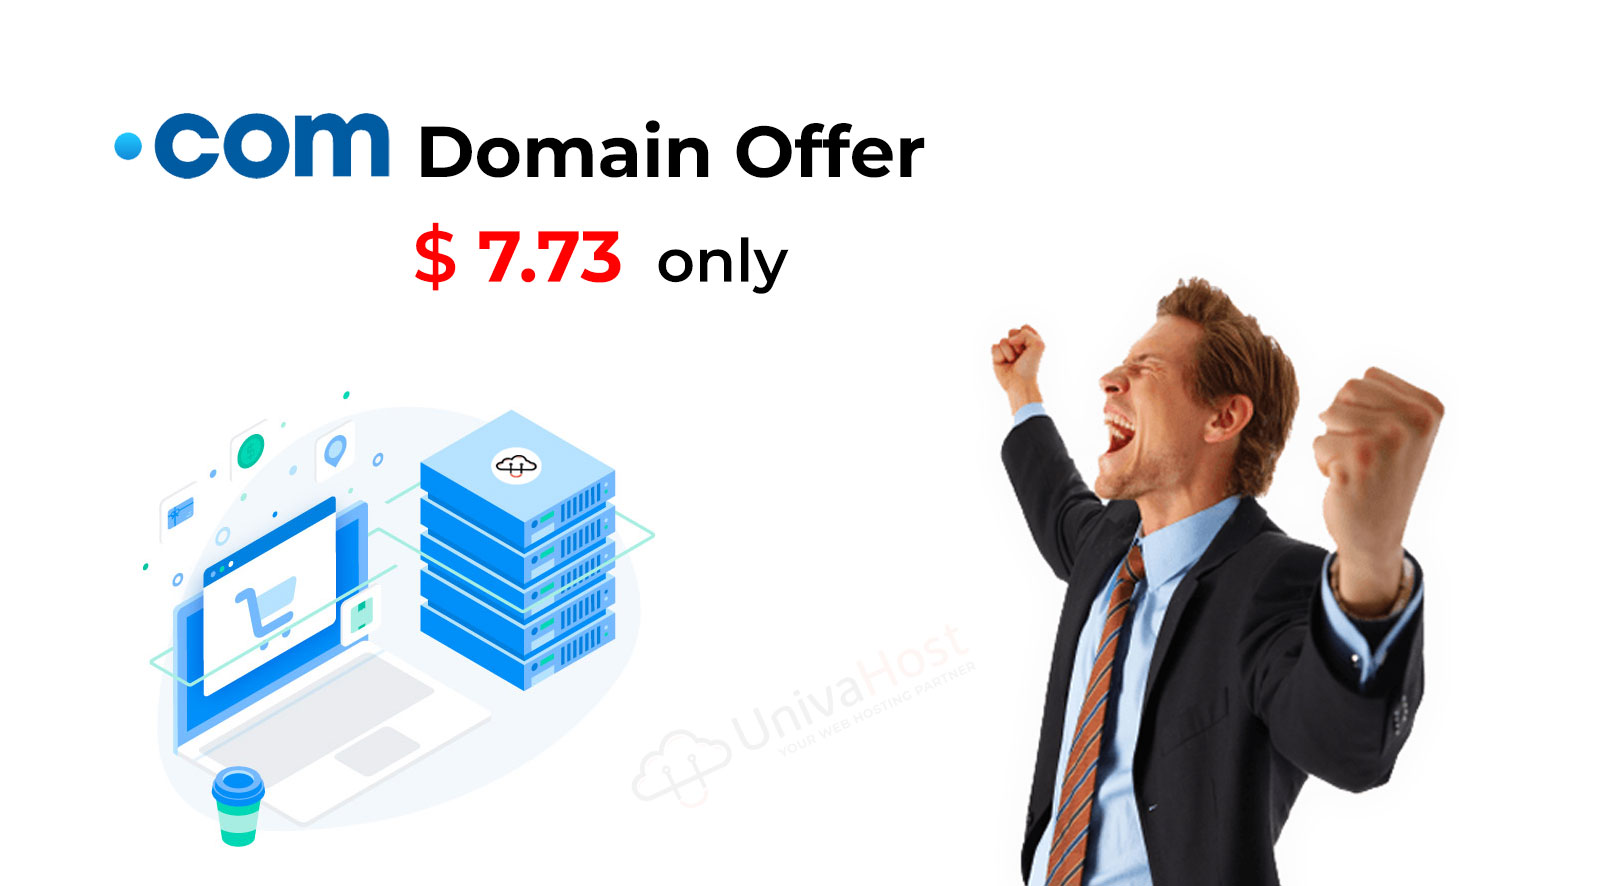 .Com Domain Durga Puja Offer $ 7.73 Only